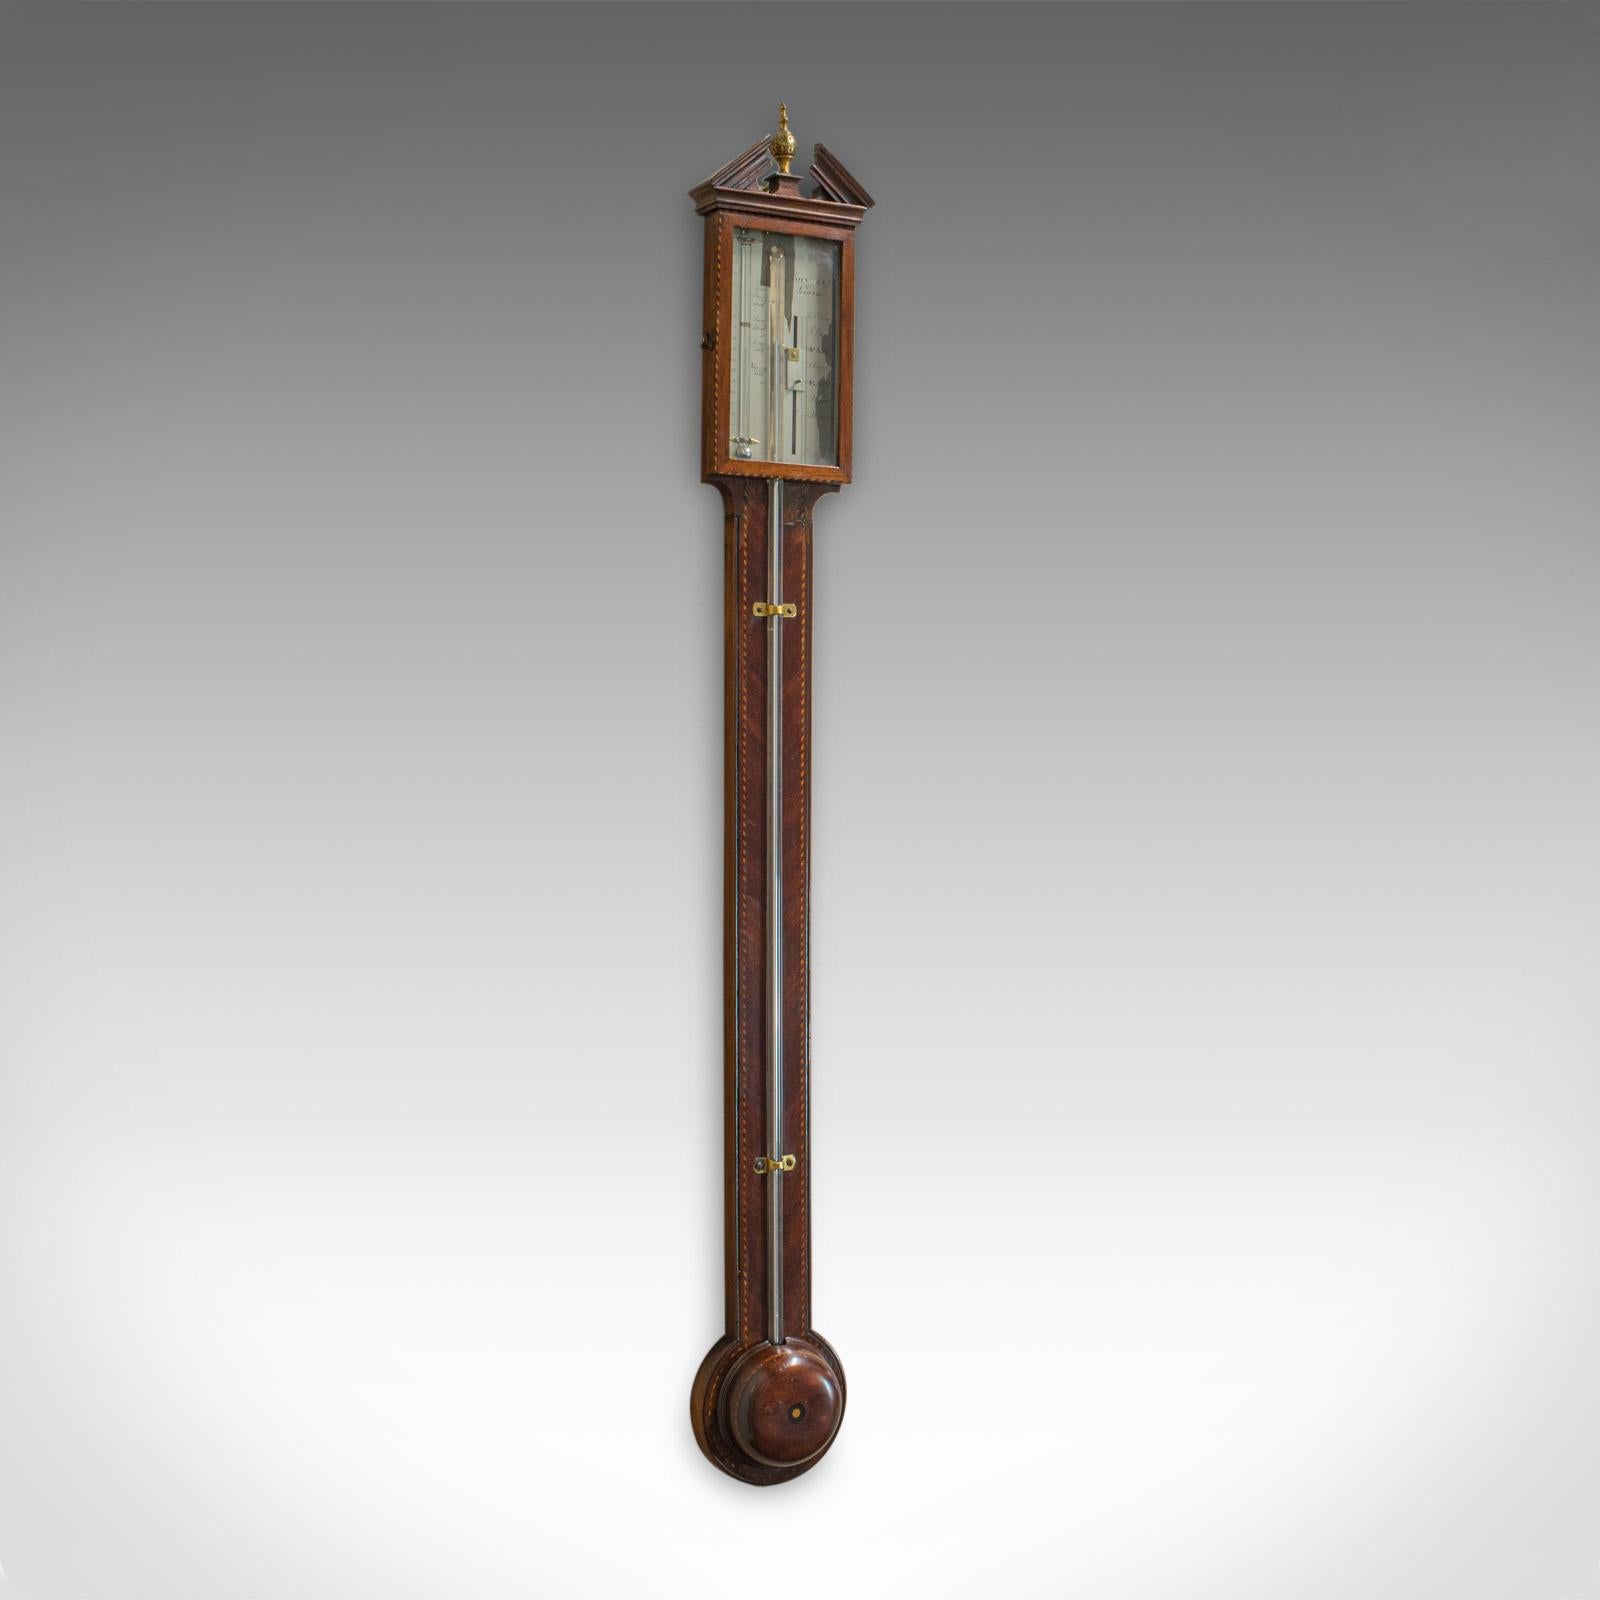 This is an antique stick barometer. An English, mahogany barometer by the renowned Torre and Co. of London and dating to the mid-19th century, circa 1850.

Select mahogany displays rich, dark hues throughout
A desirable aged patina, with some